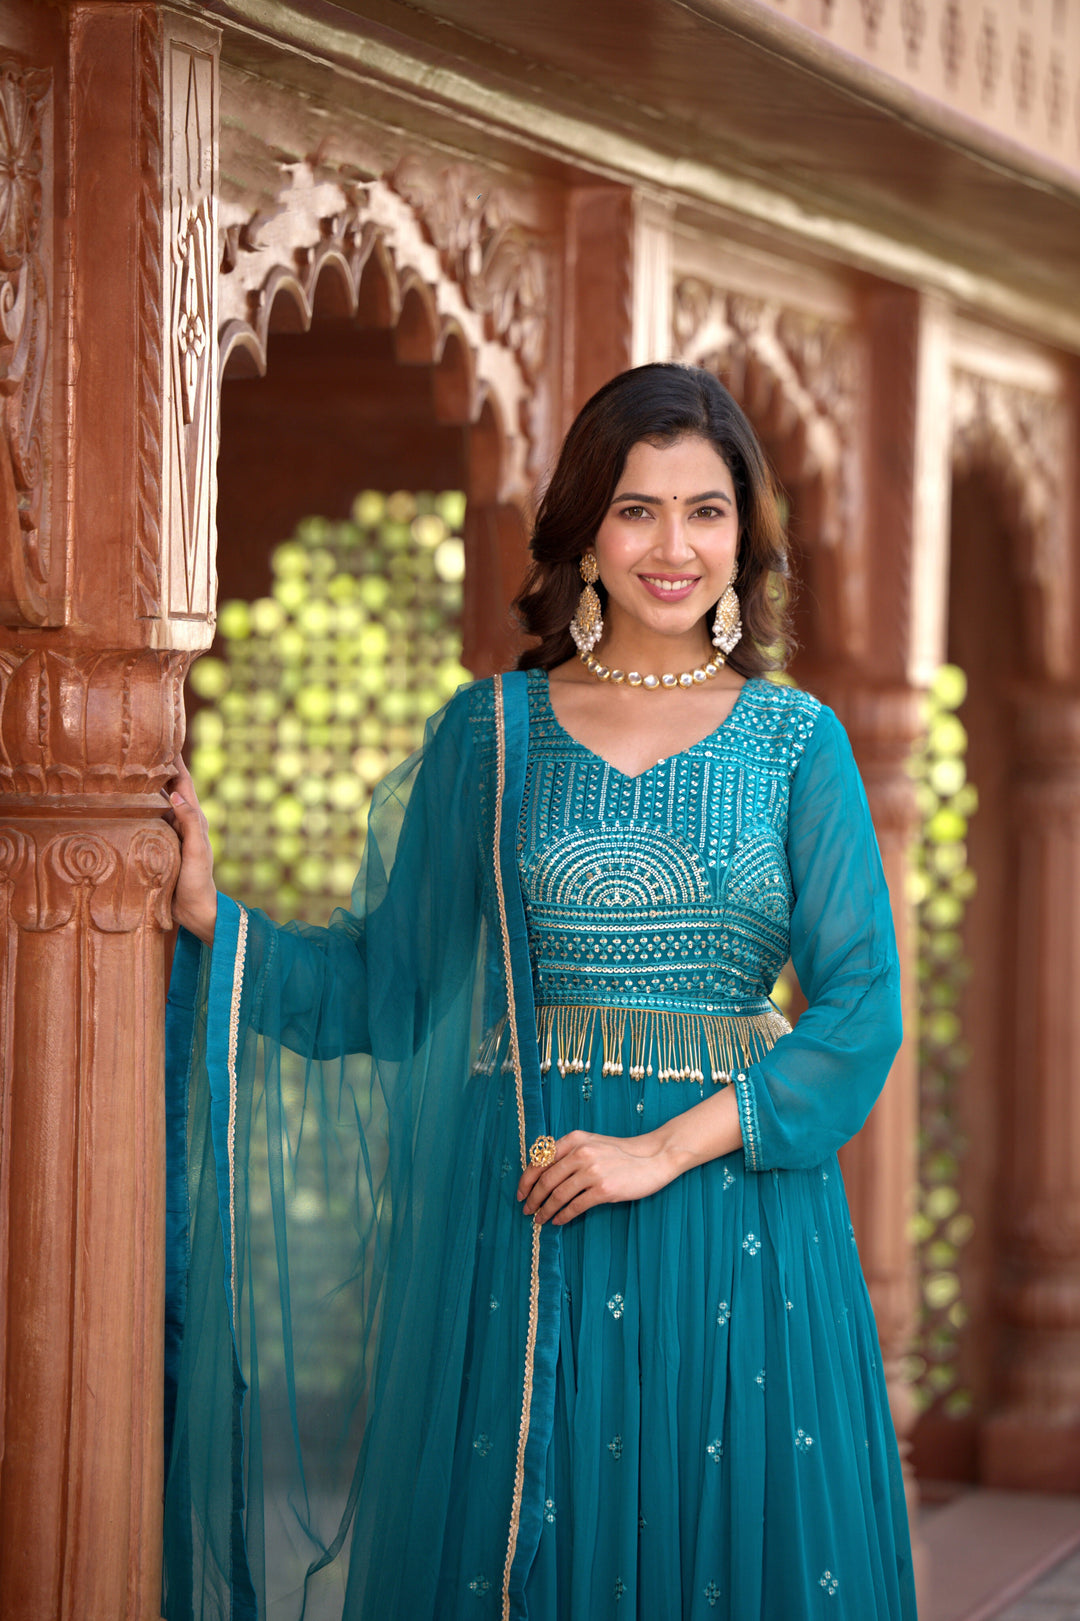 Elegant Blue Georgette Gown with Exquisite Embroidery for Weddings & Parties